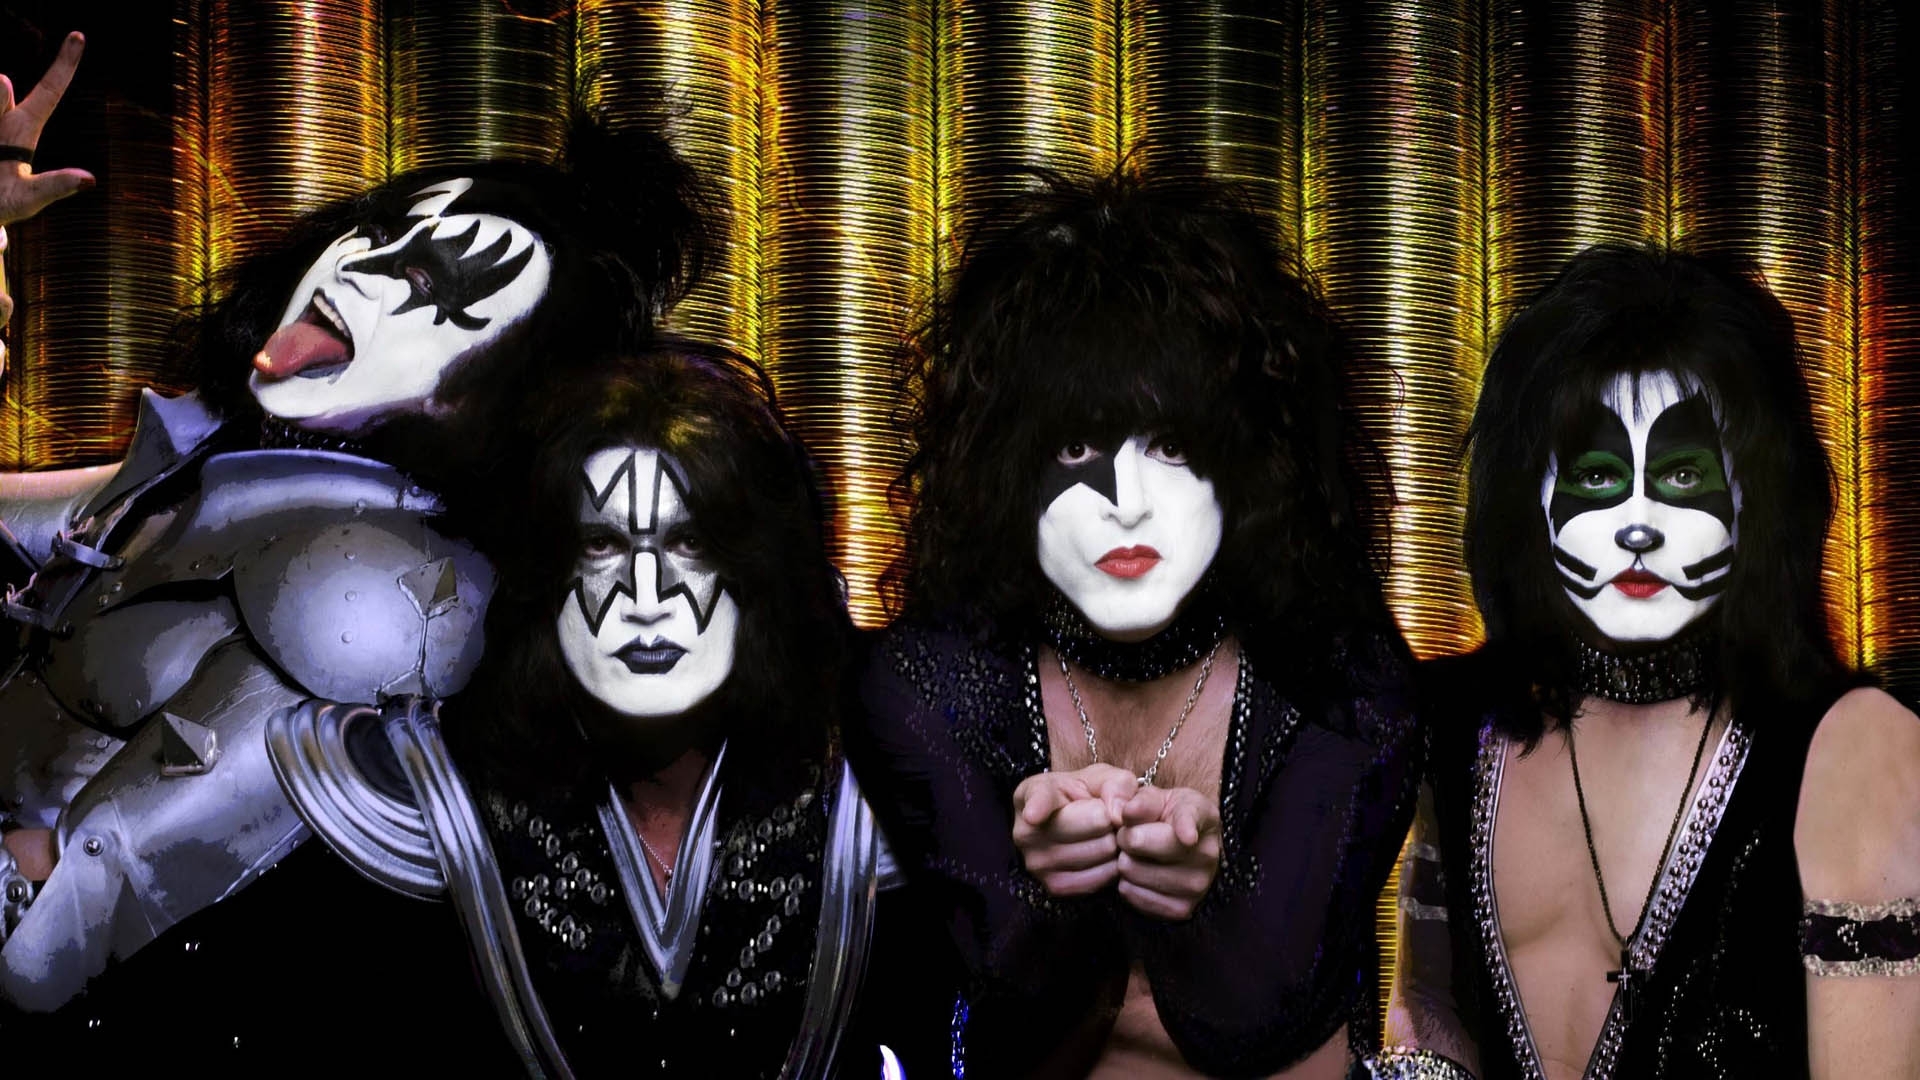 Kiss Wallpapers, Pictures, Images